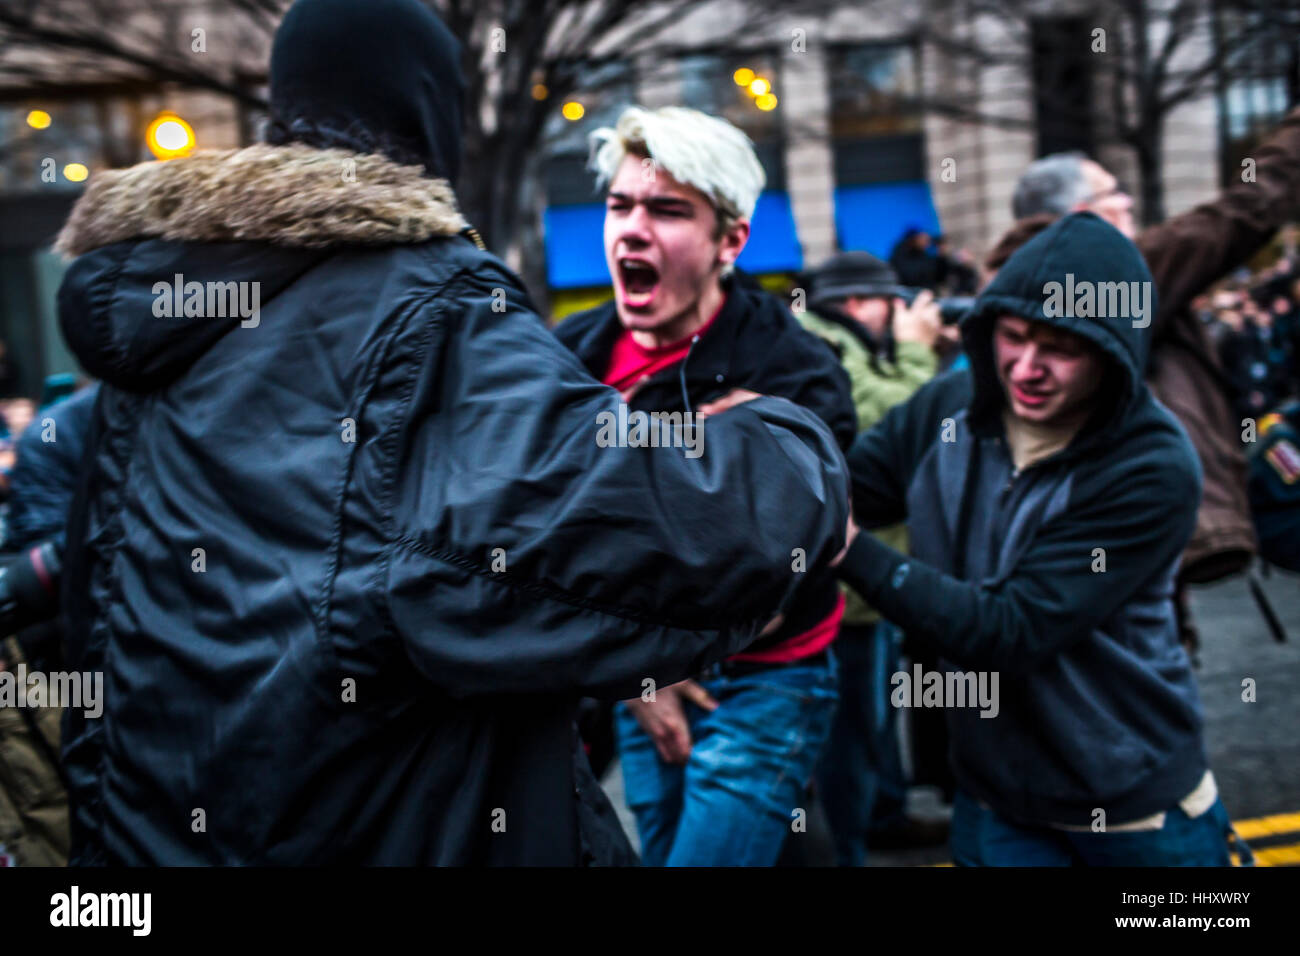 Washington, USA. 20th Jan, 2017. Hours after Donald Trump was inaugurated as the 45th President of the United States, protesters clashed with riot police, who reportedly were targeted the groins of protestors and launched flash grenades into the packed streets. Credit: PACIFIC PRESS/Alamy Live News Stock Photo